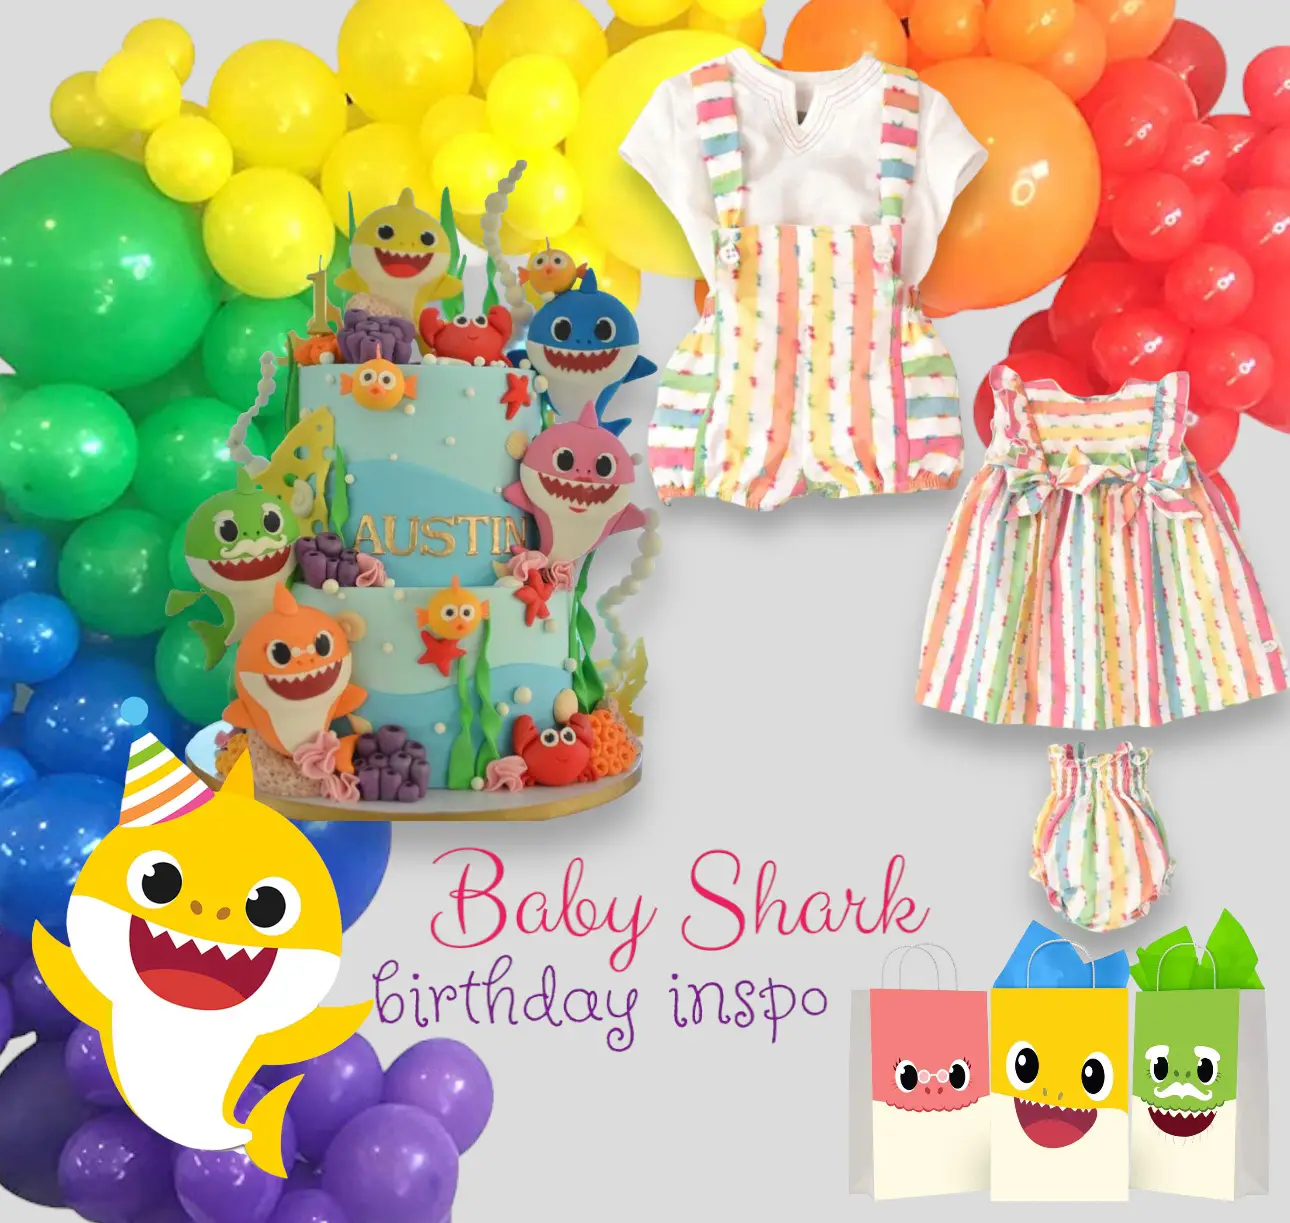 BABY SHARK BIRTHDAY PARTY INSPO, Gallery posted by Piccoli&Co